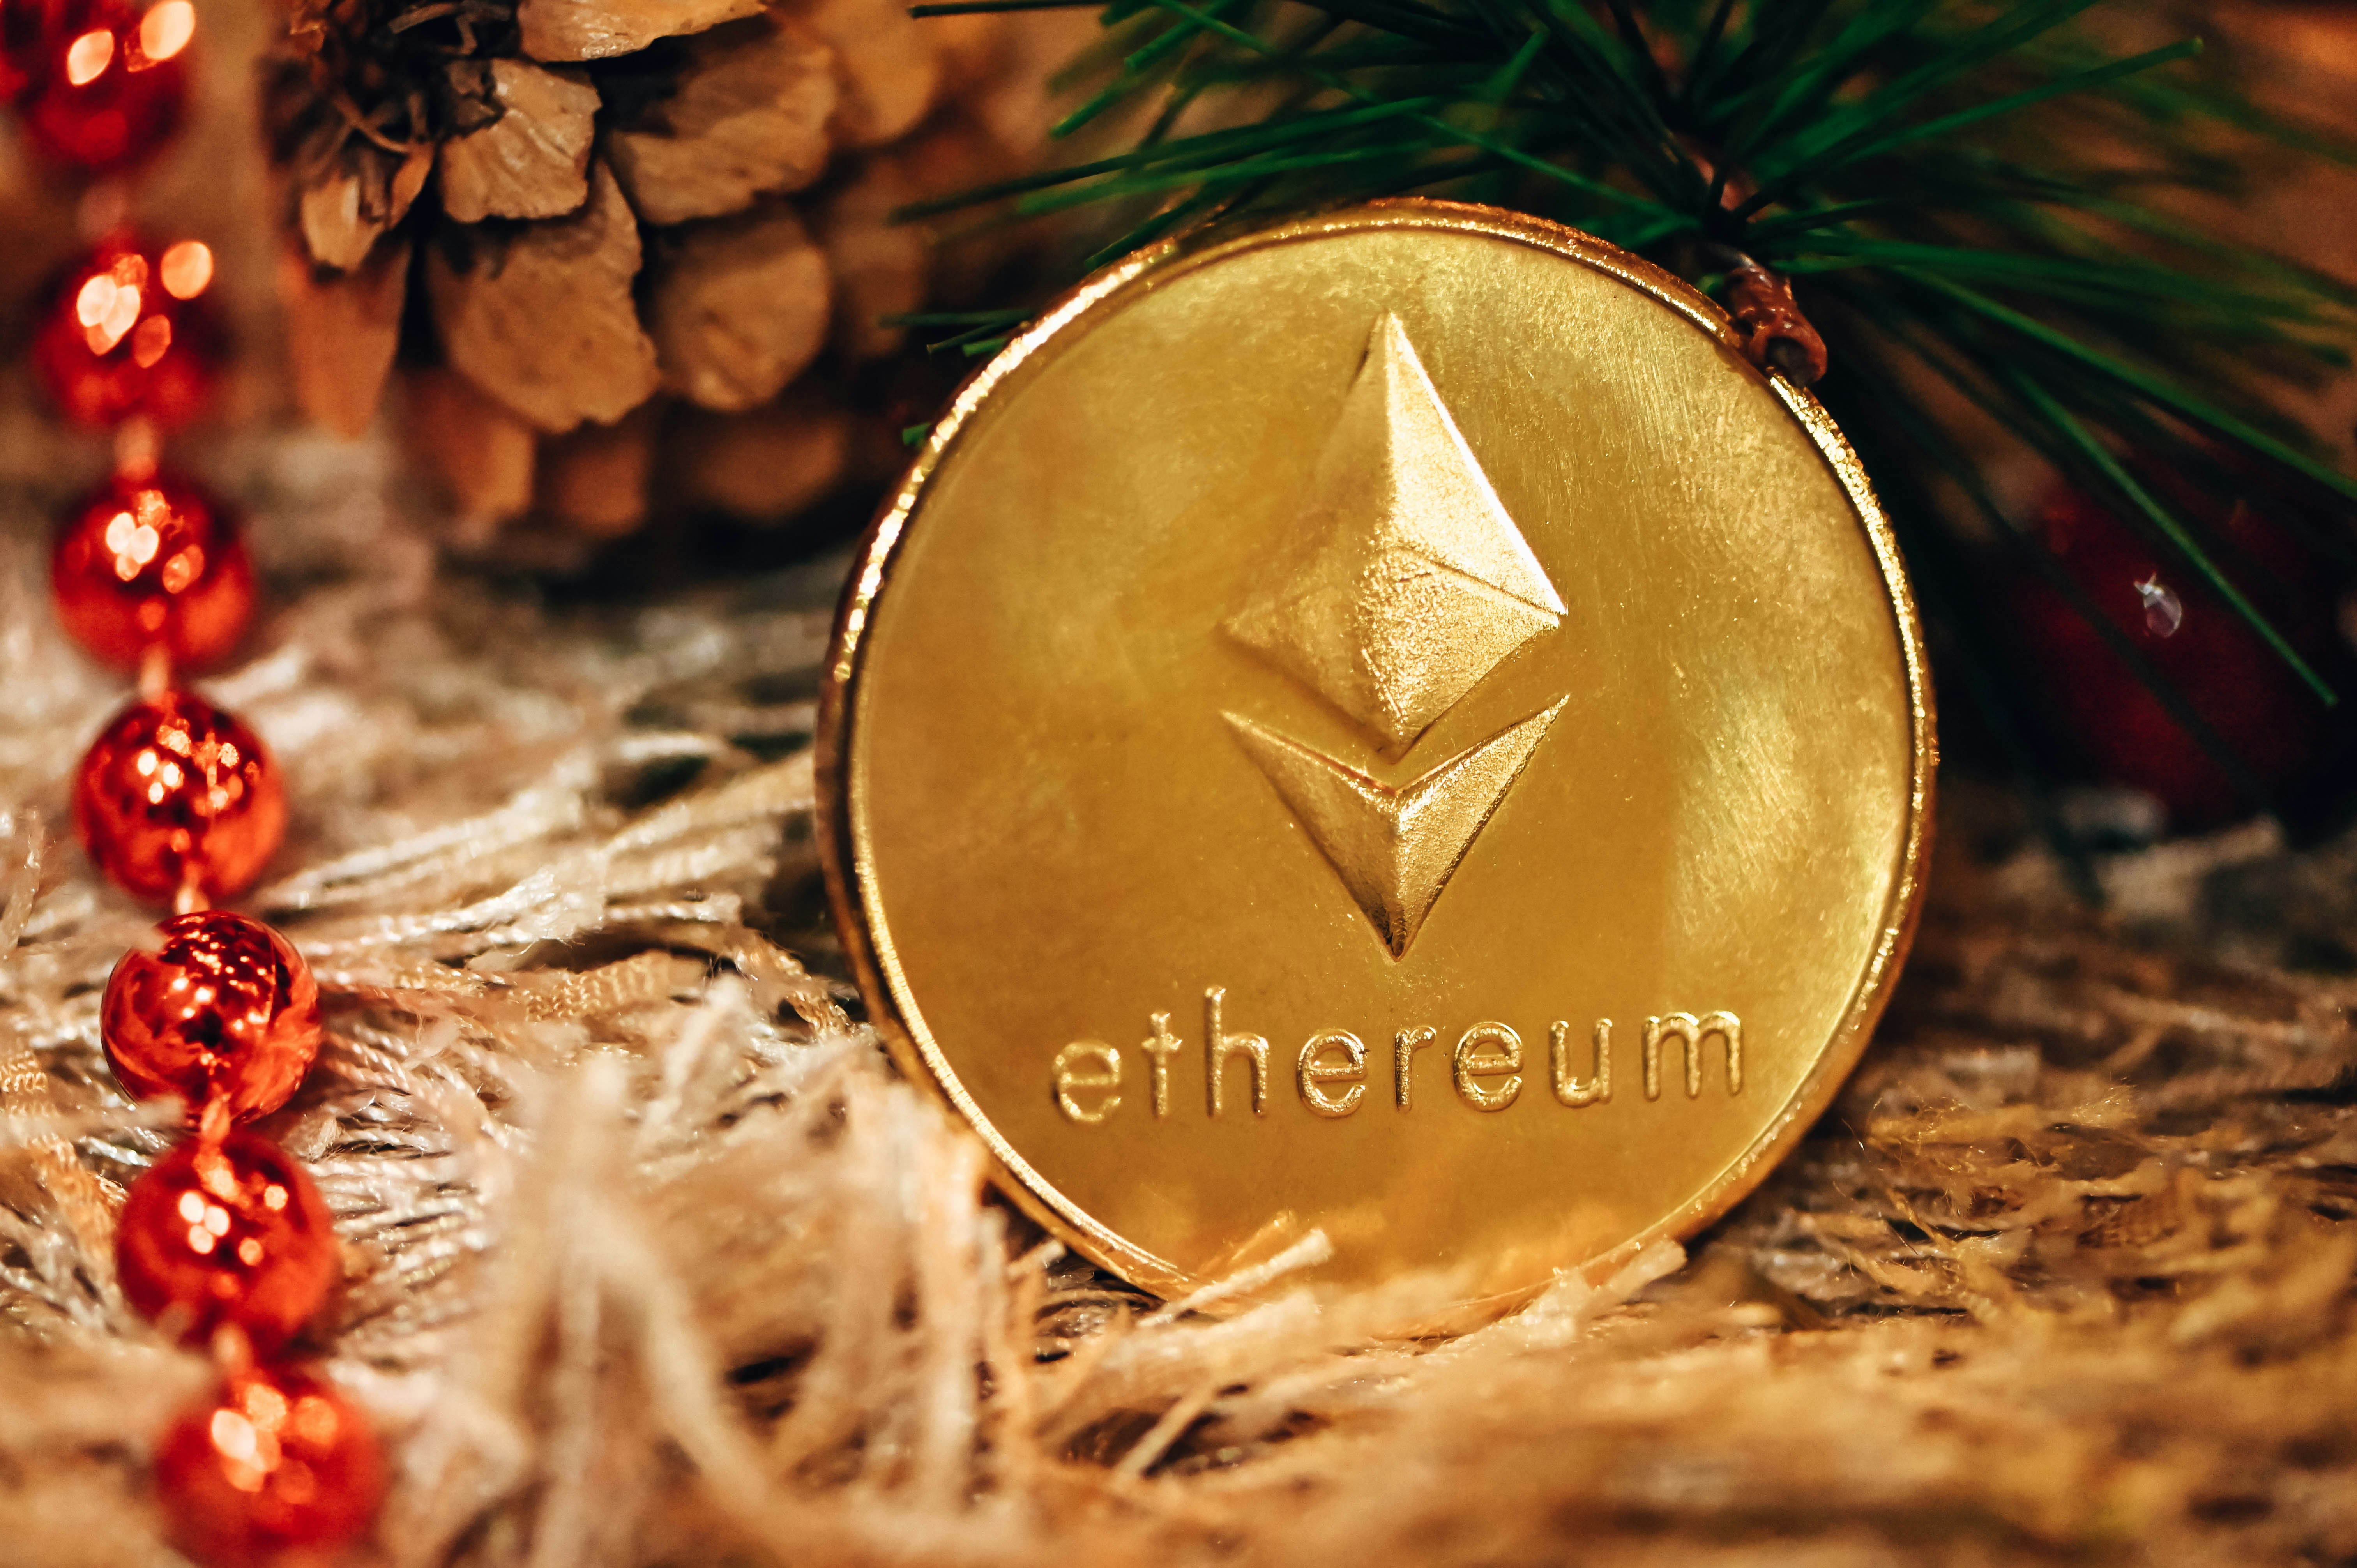 Close-up of Ethereum coin in front of a pine cone